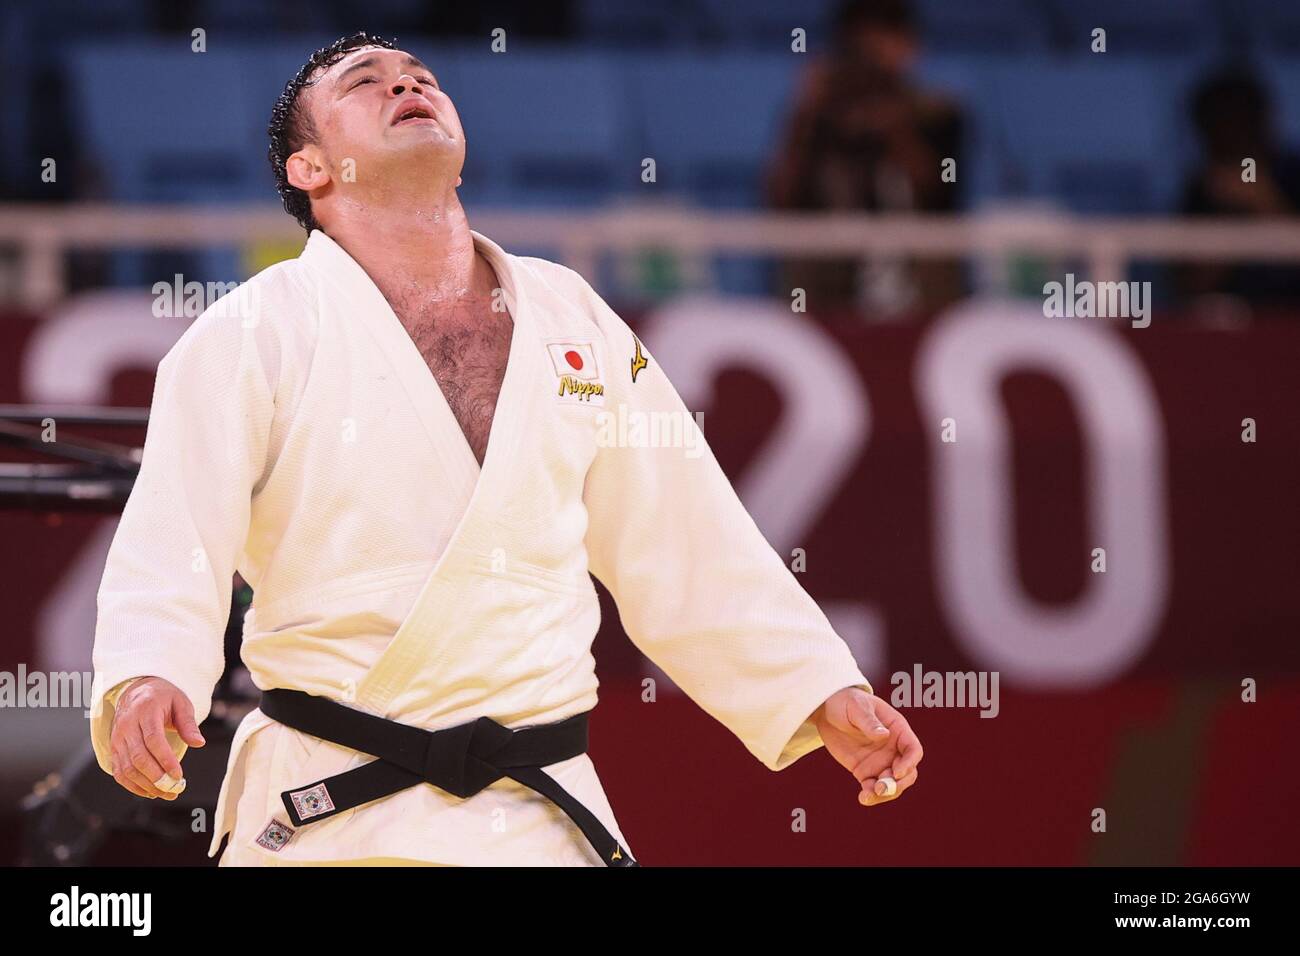 Tokio, Japan. 29th July, 2021. Judo: Olympia, 100 kg, men, final, Wolf (Japan) - Cho (South Korea), at the Nippon Budokan. Aaron Wolf reacts in the fight. Credit: Oliver Weiken/dpa/Alamy Live News Stock Photo